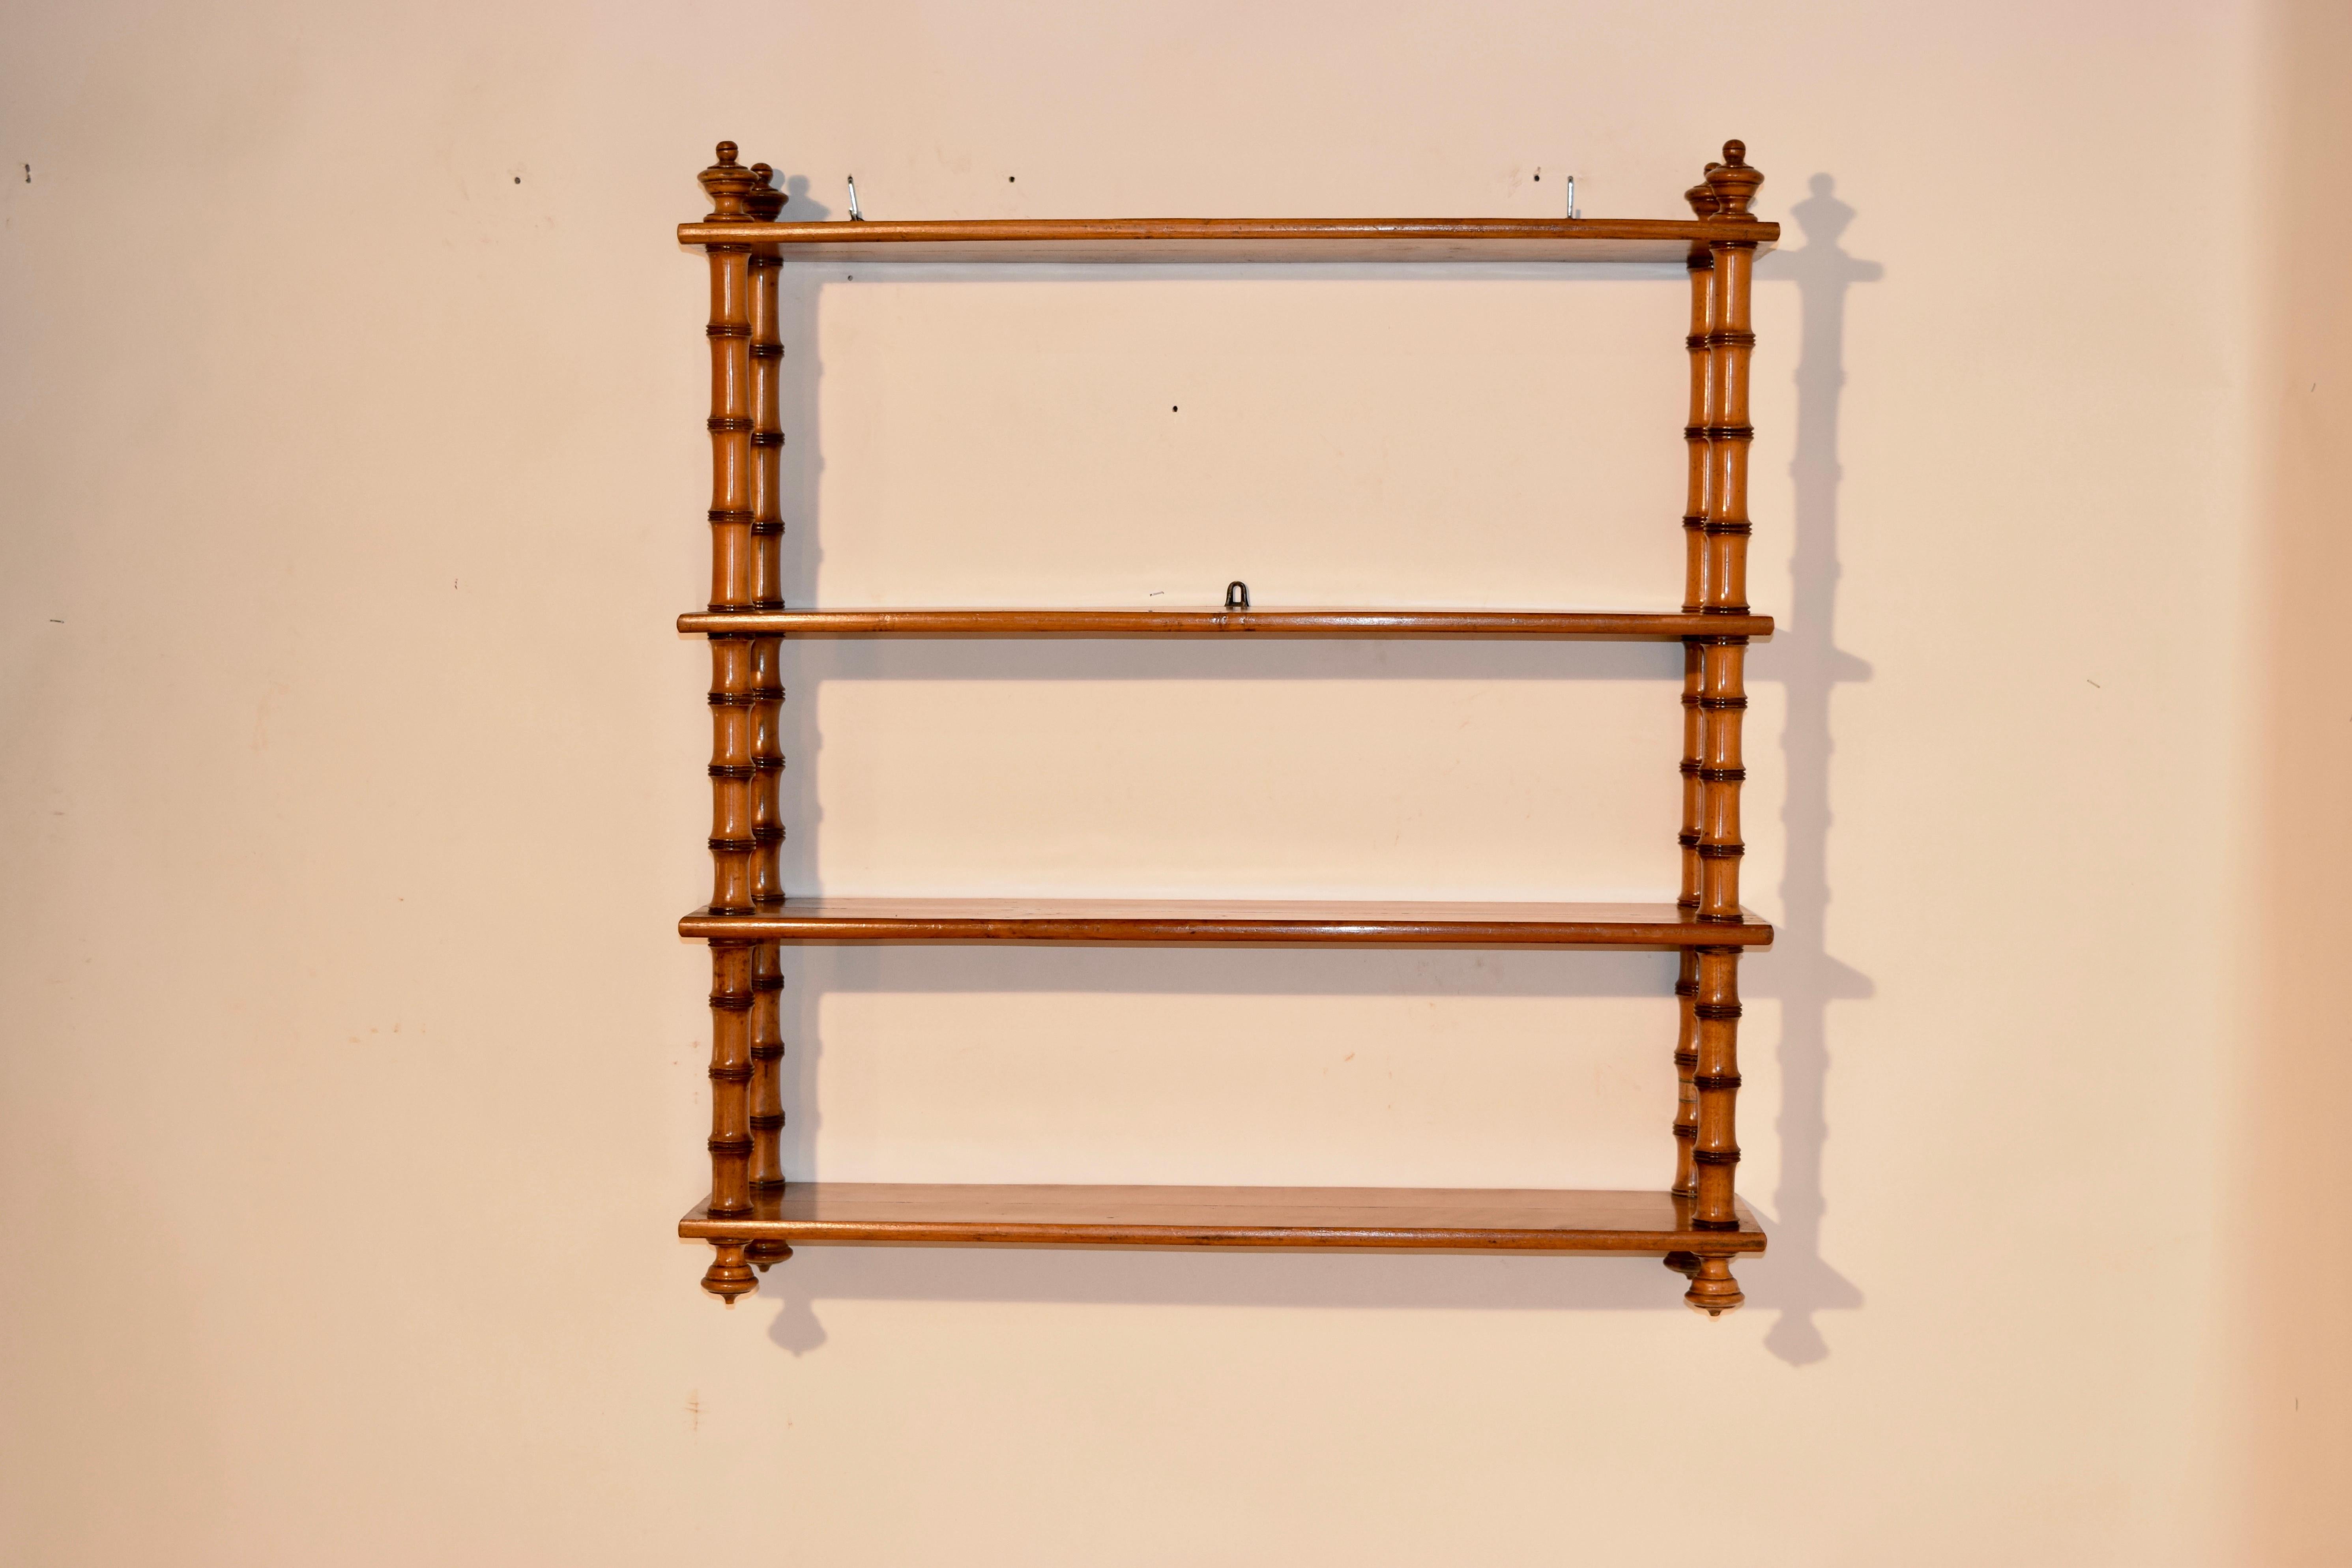 19th century hanging shelf made from cherry from France. The top and bottom are decorated with hand turned finials and has four shelves which are separated by hand turned shelf supports in the style of faux bamboo turnings.